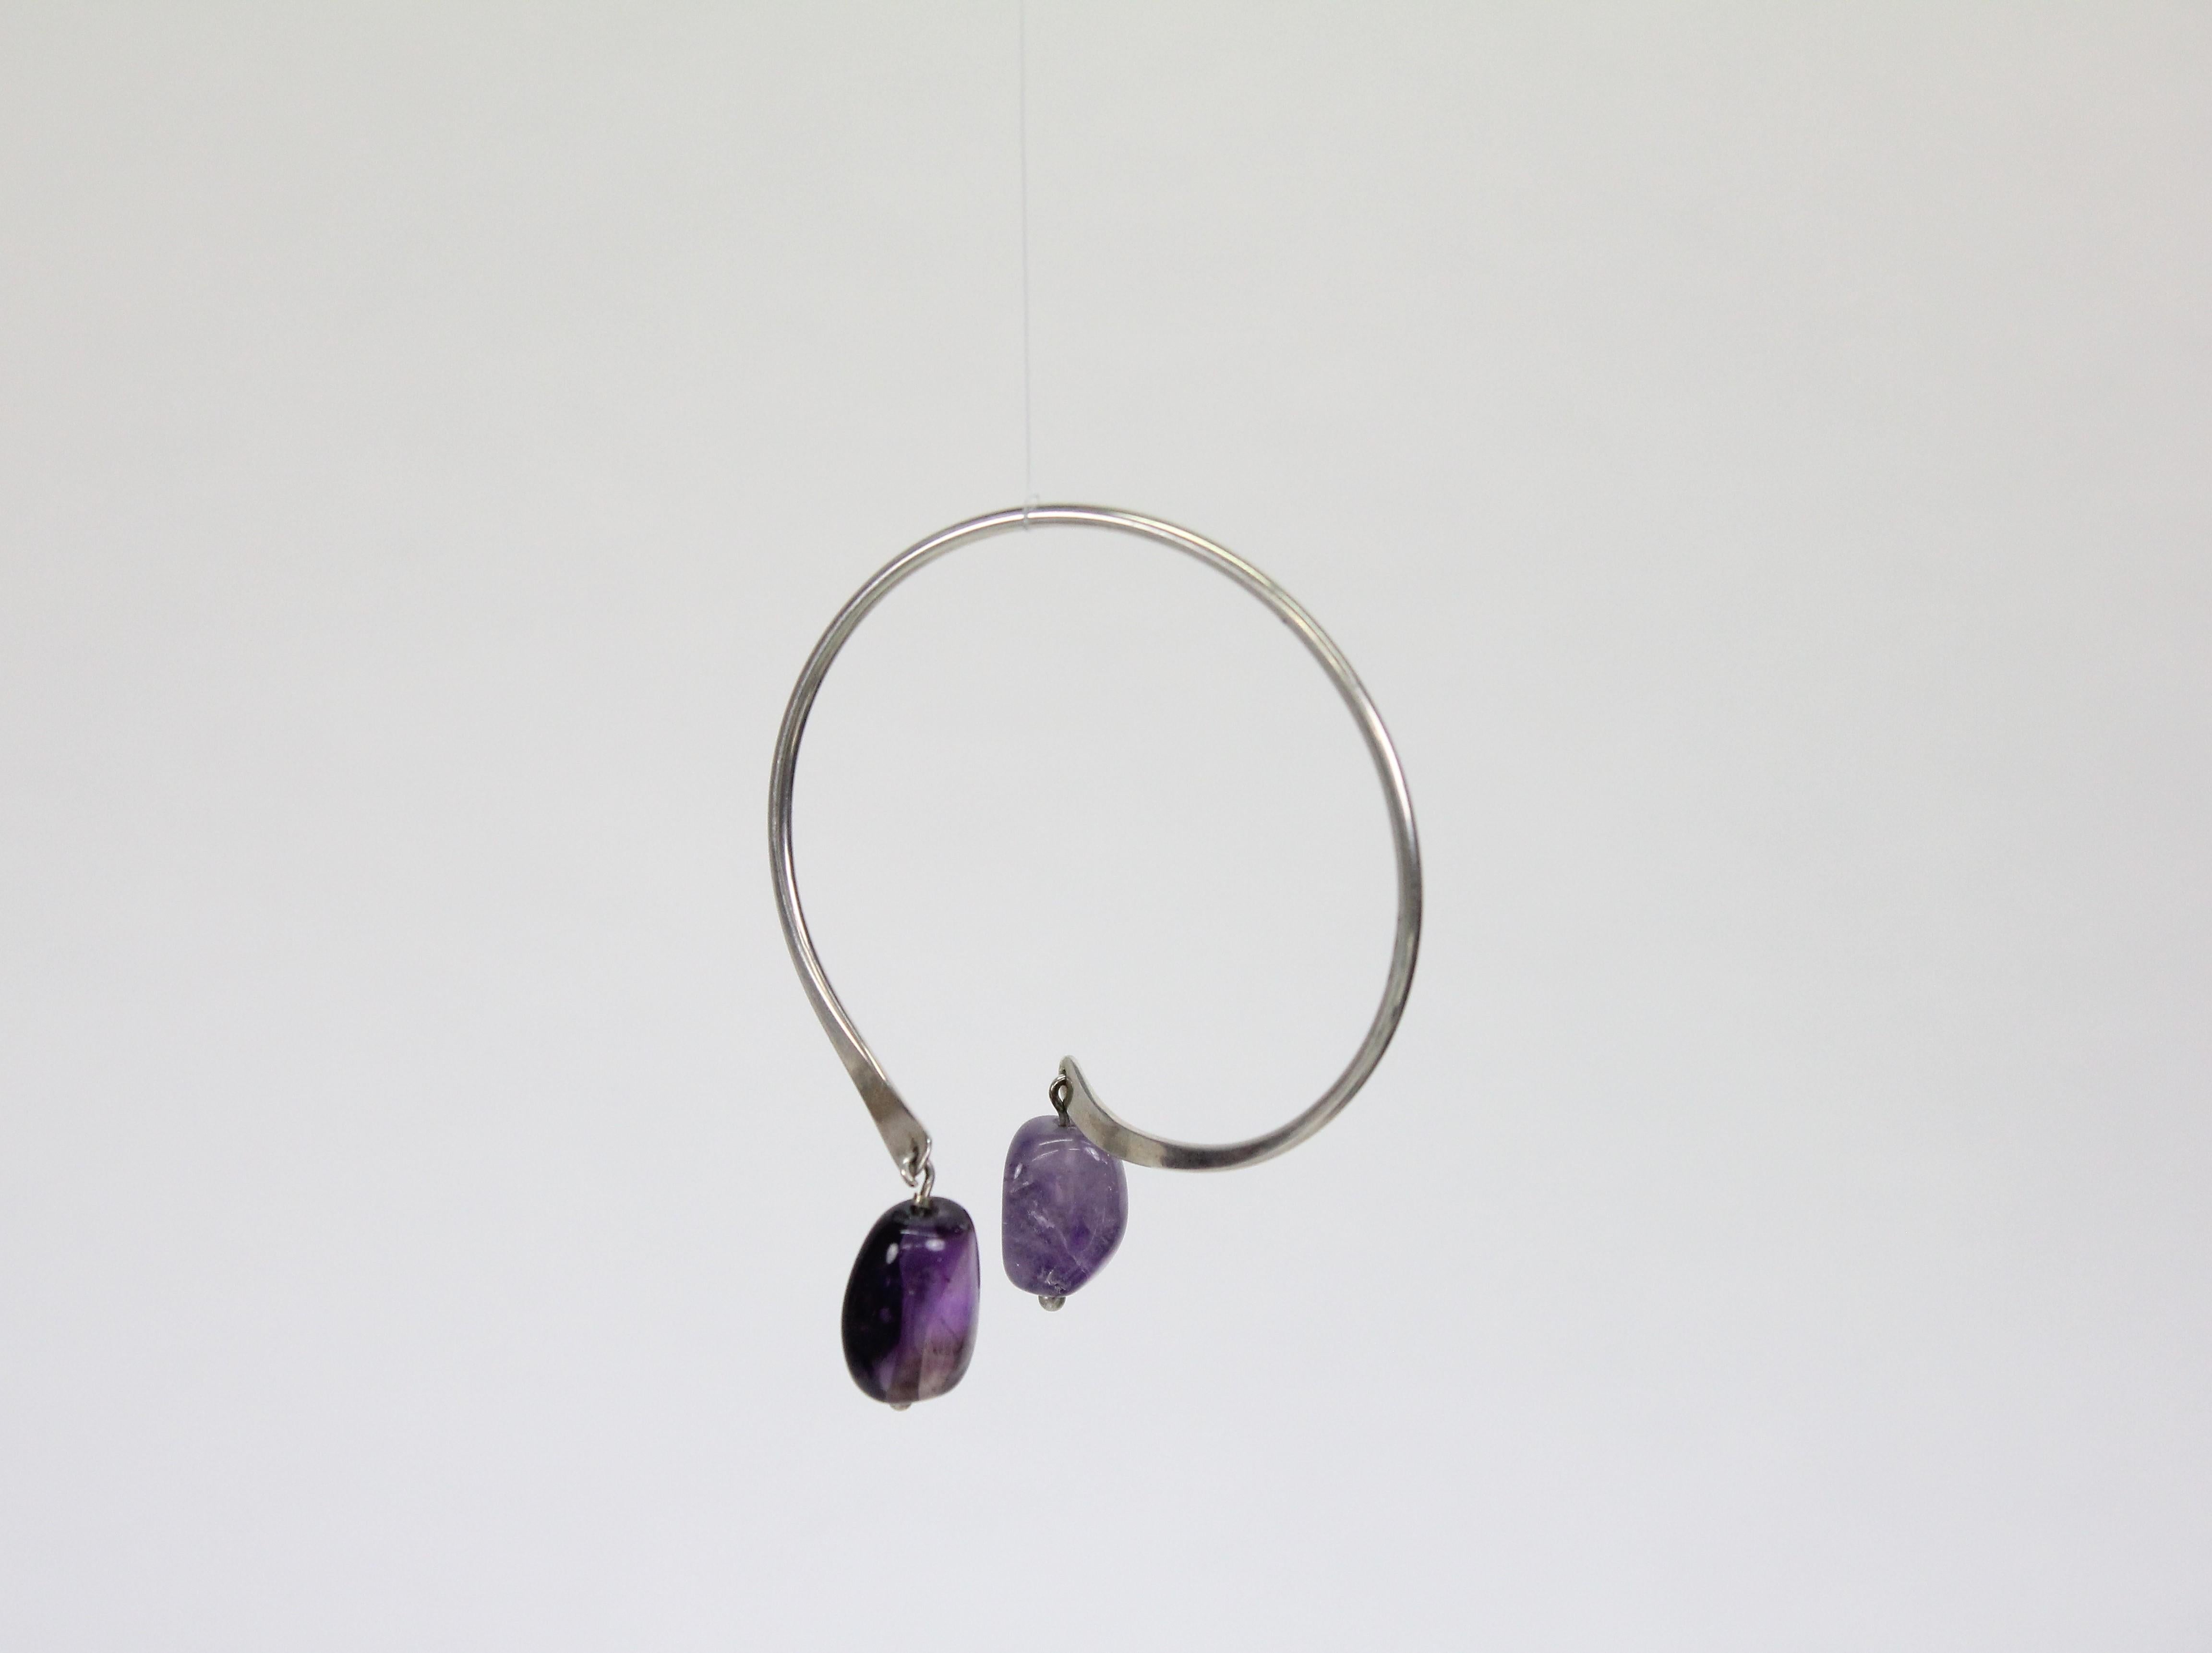 Wonderful bracelet by Swedish Modernist jeweler Borgila in Stockholm.
Sterling silver and with two hanging tumbled amethysts. 
This bracelet can be worn in different ways, see images. 

Fully marked with Swedish silver stamps.
Diameter circa 6.5cm